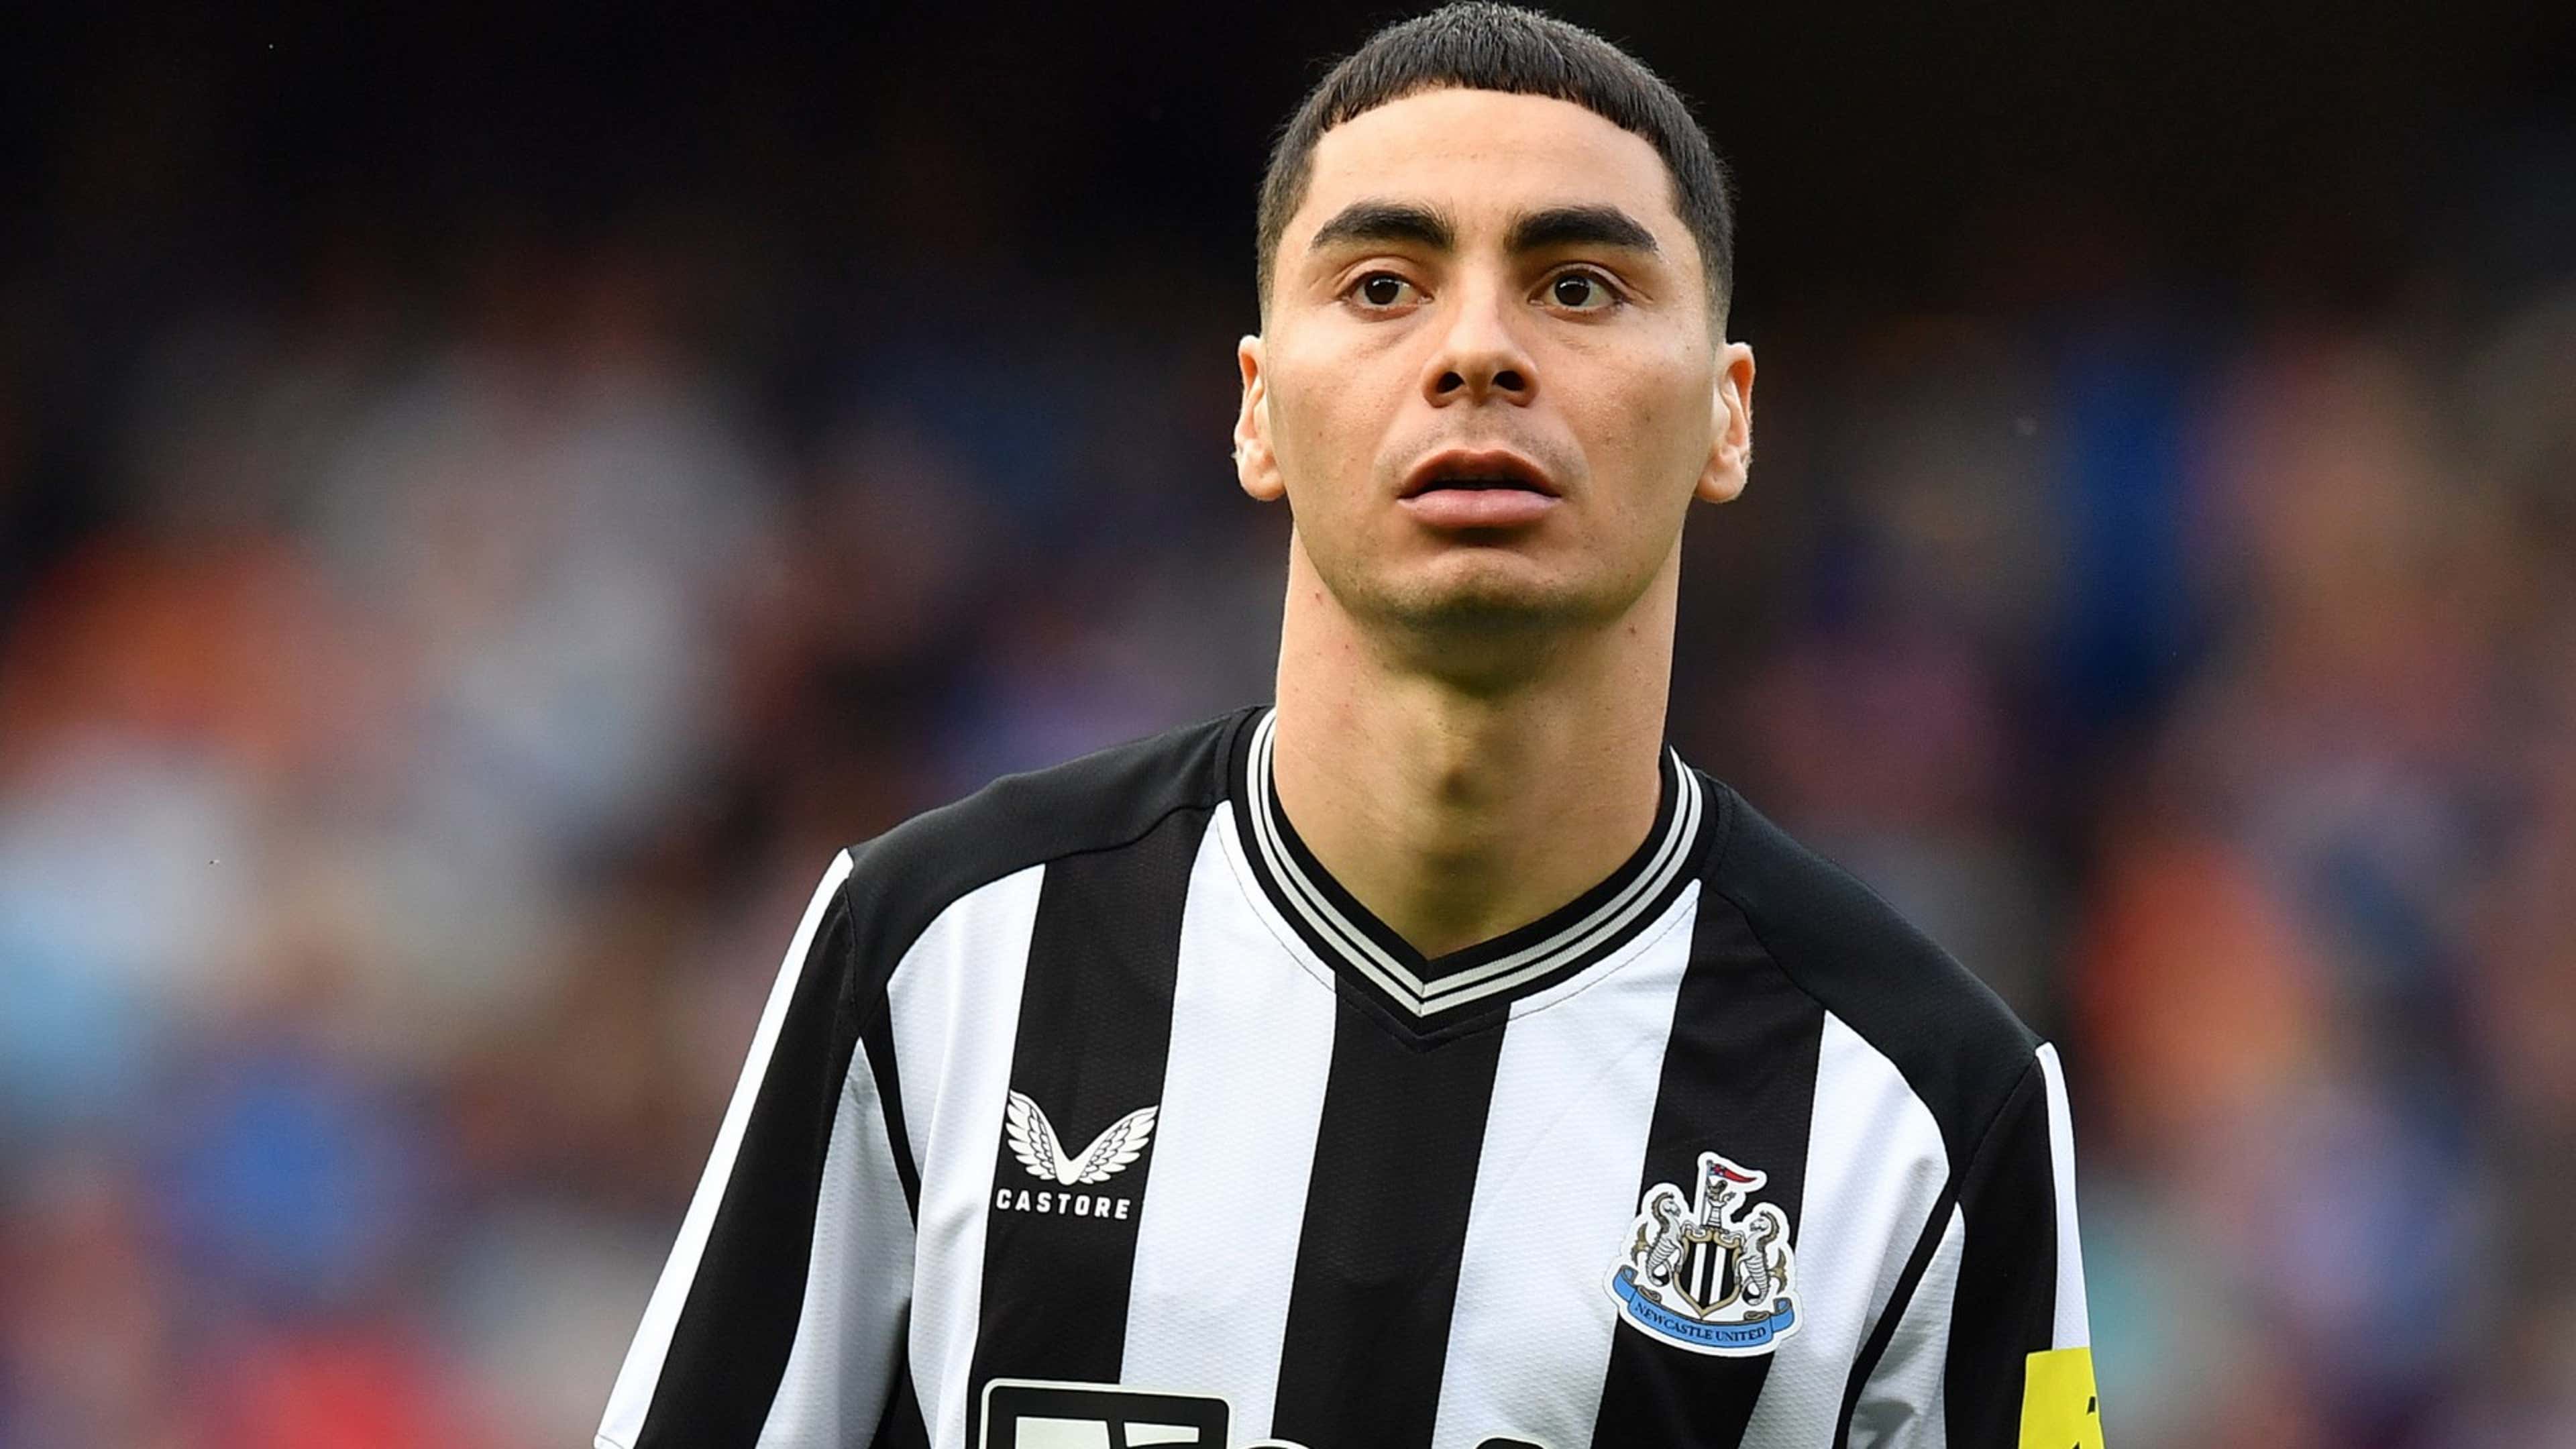 Transfer surprise! Saudi club Al-Shabab strike agreement to sign Miguel  Almiron from Newcastle as Magpies look to balance the books | Goal.com US